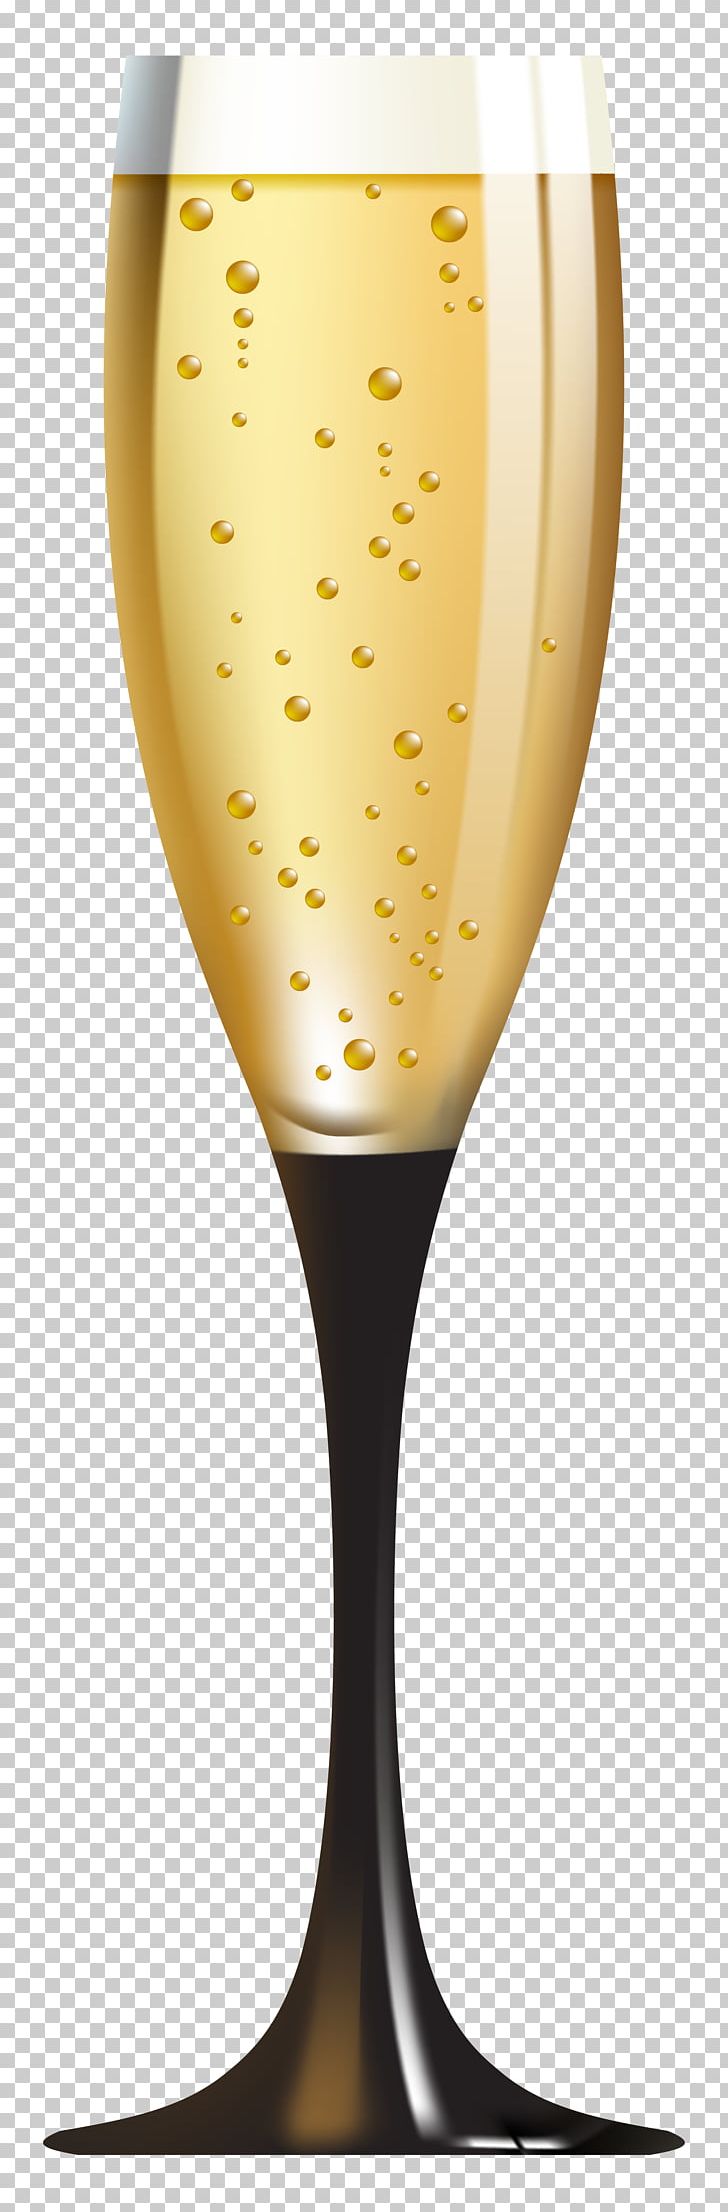 White Wine Champagne Glass Cocktail PNG, Clipart, Alcoholic Beverage, Beer Glass, Bottle, Champagne, Champagne Glass Free PNG Download